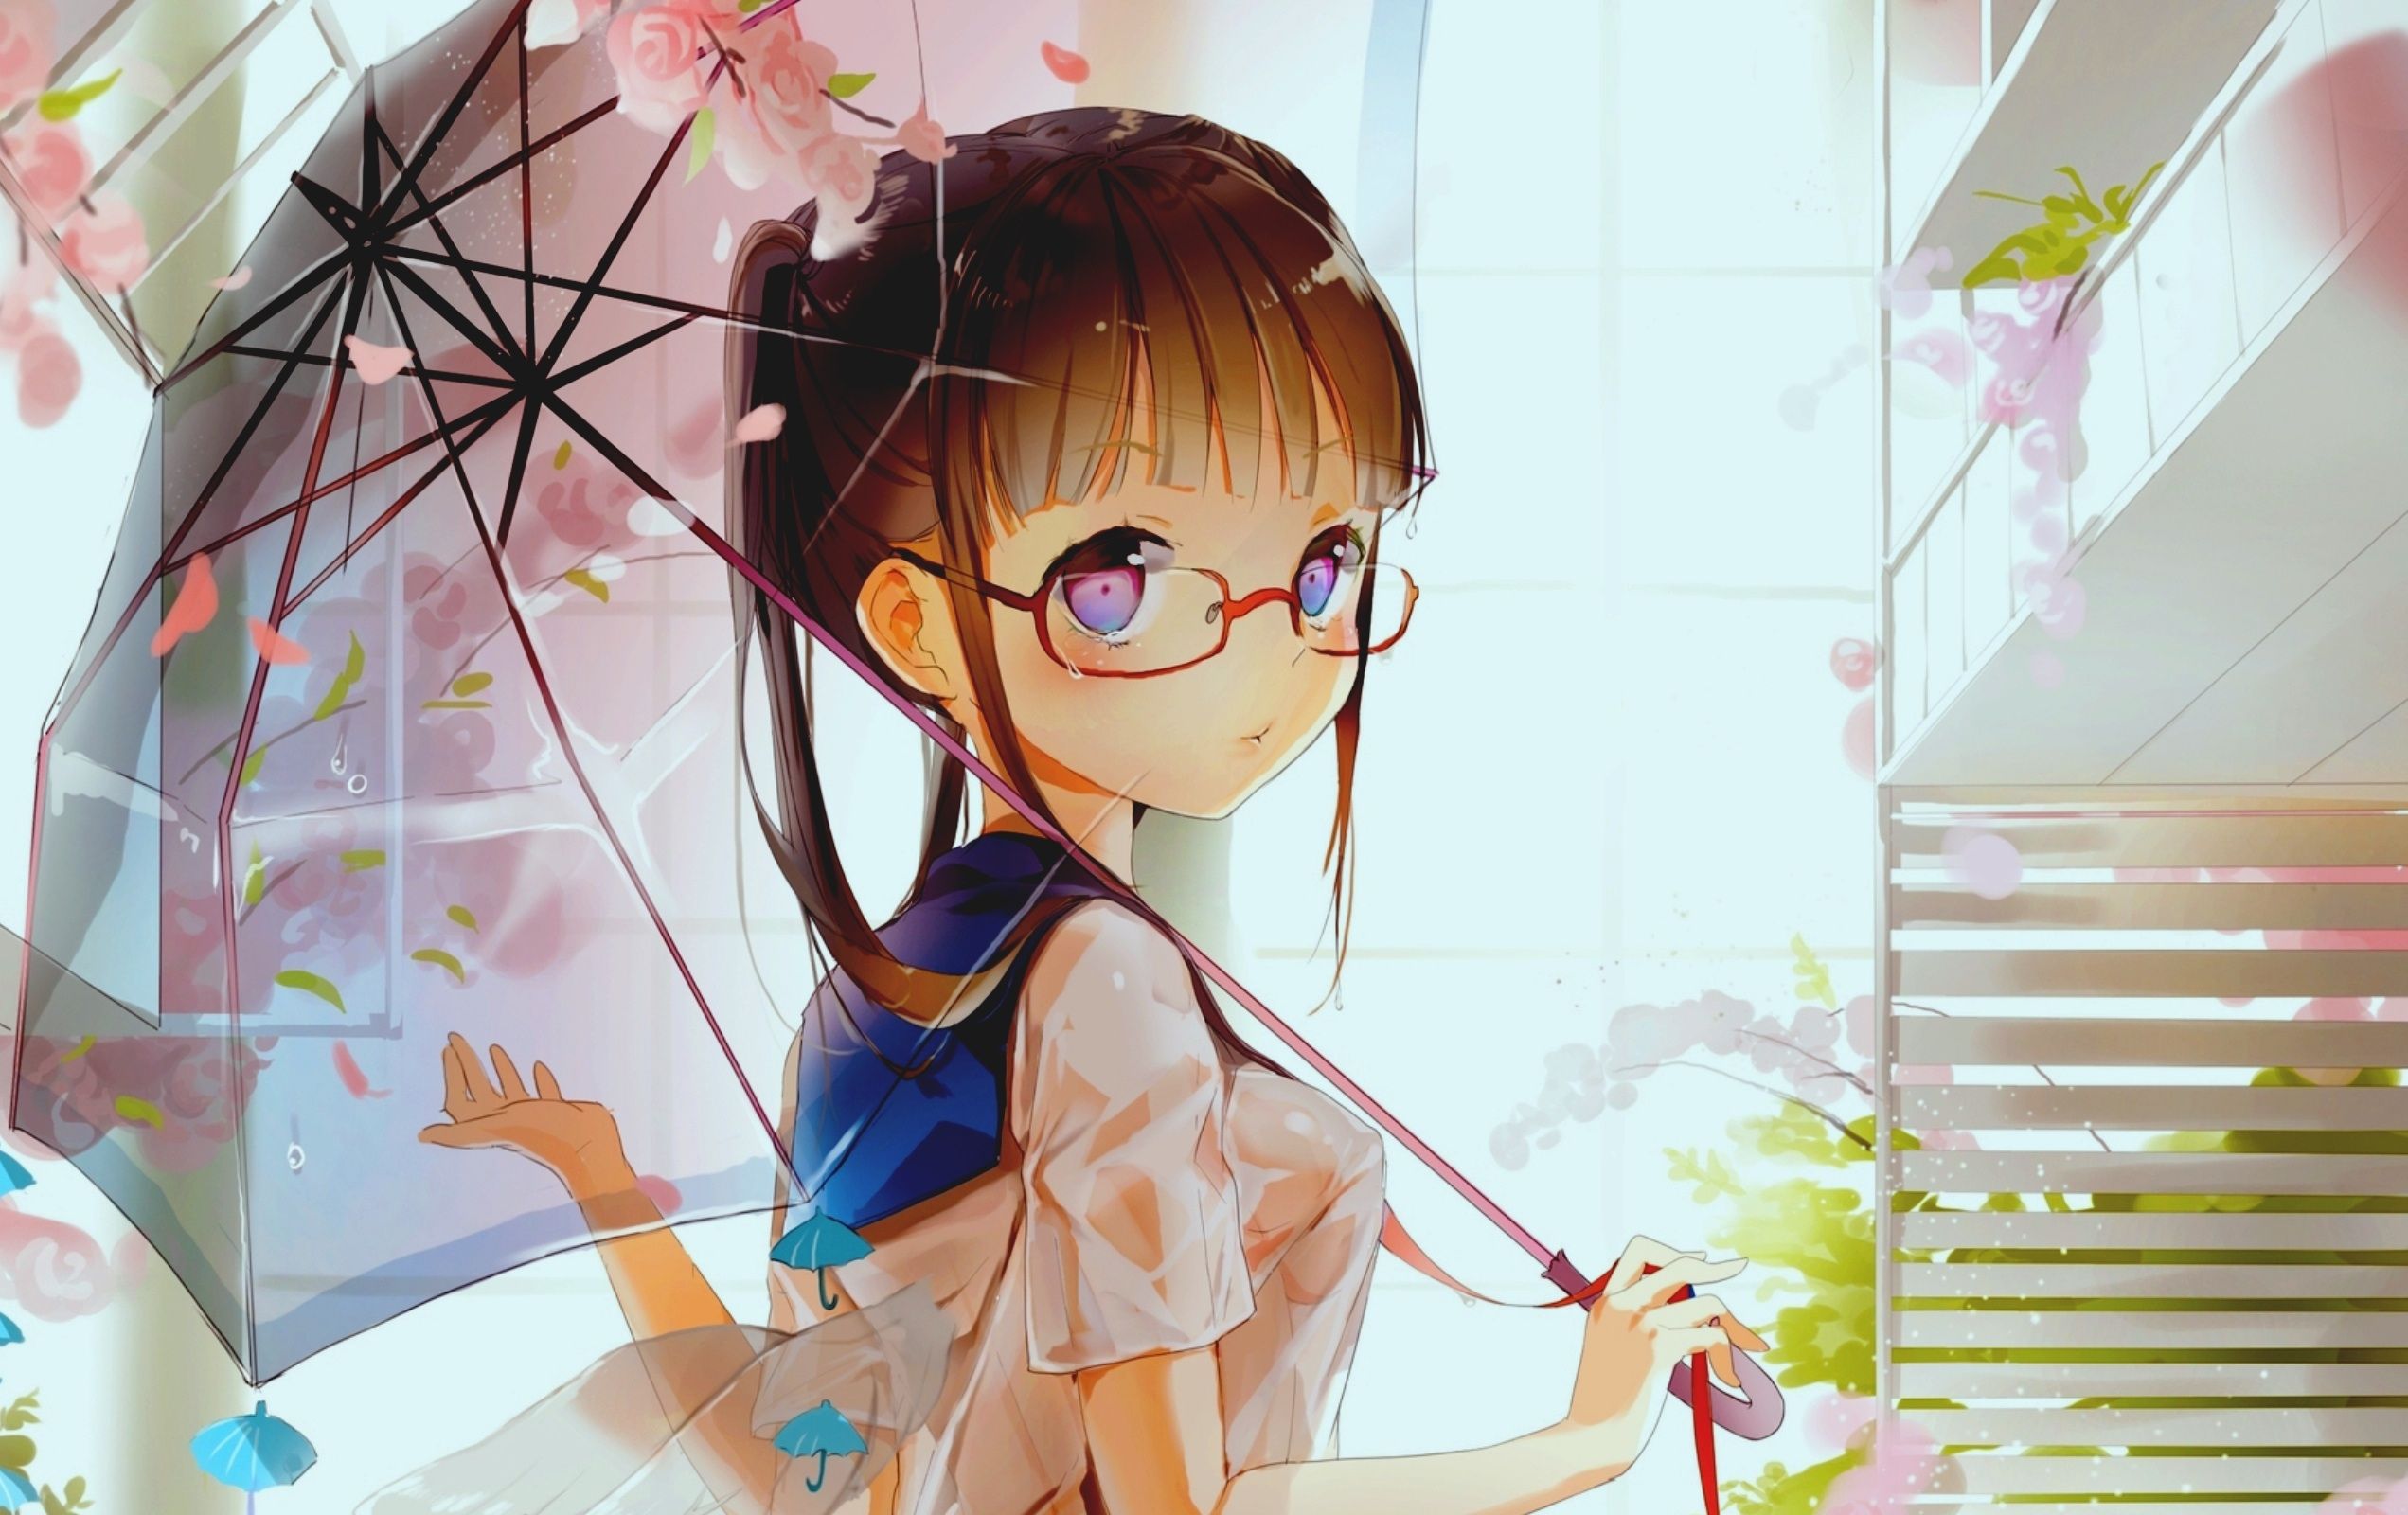 Cute Anime Girl With Glasses Wallpapers - Wallpaper Cave